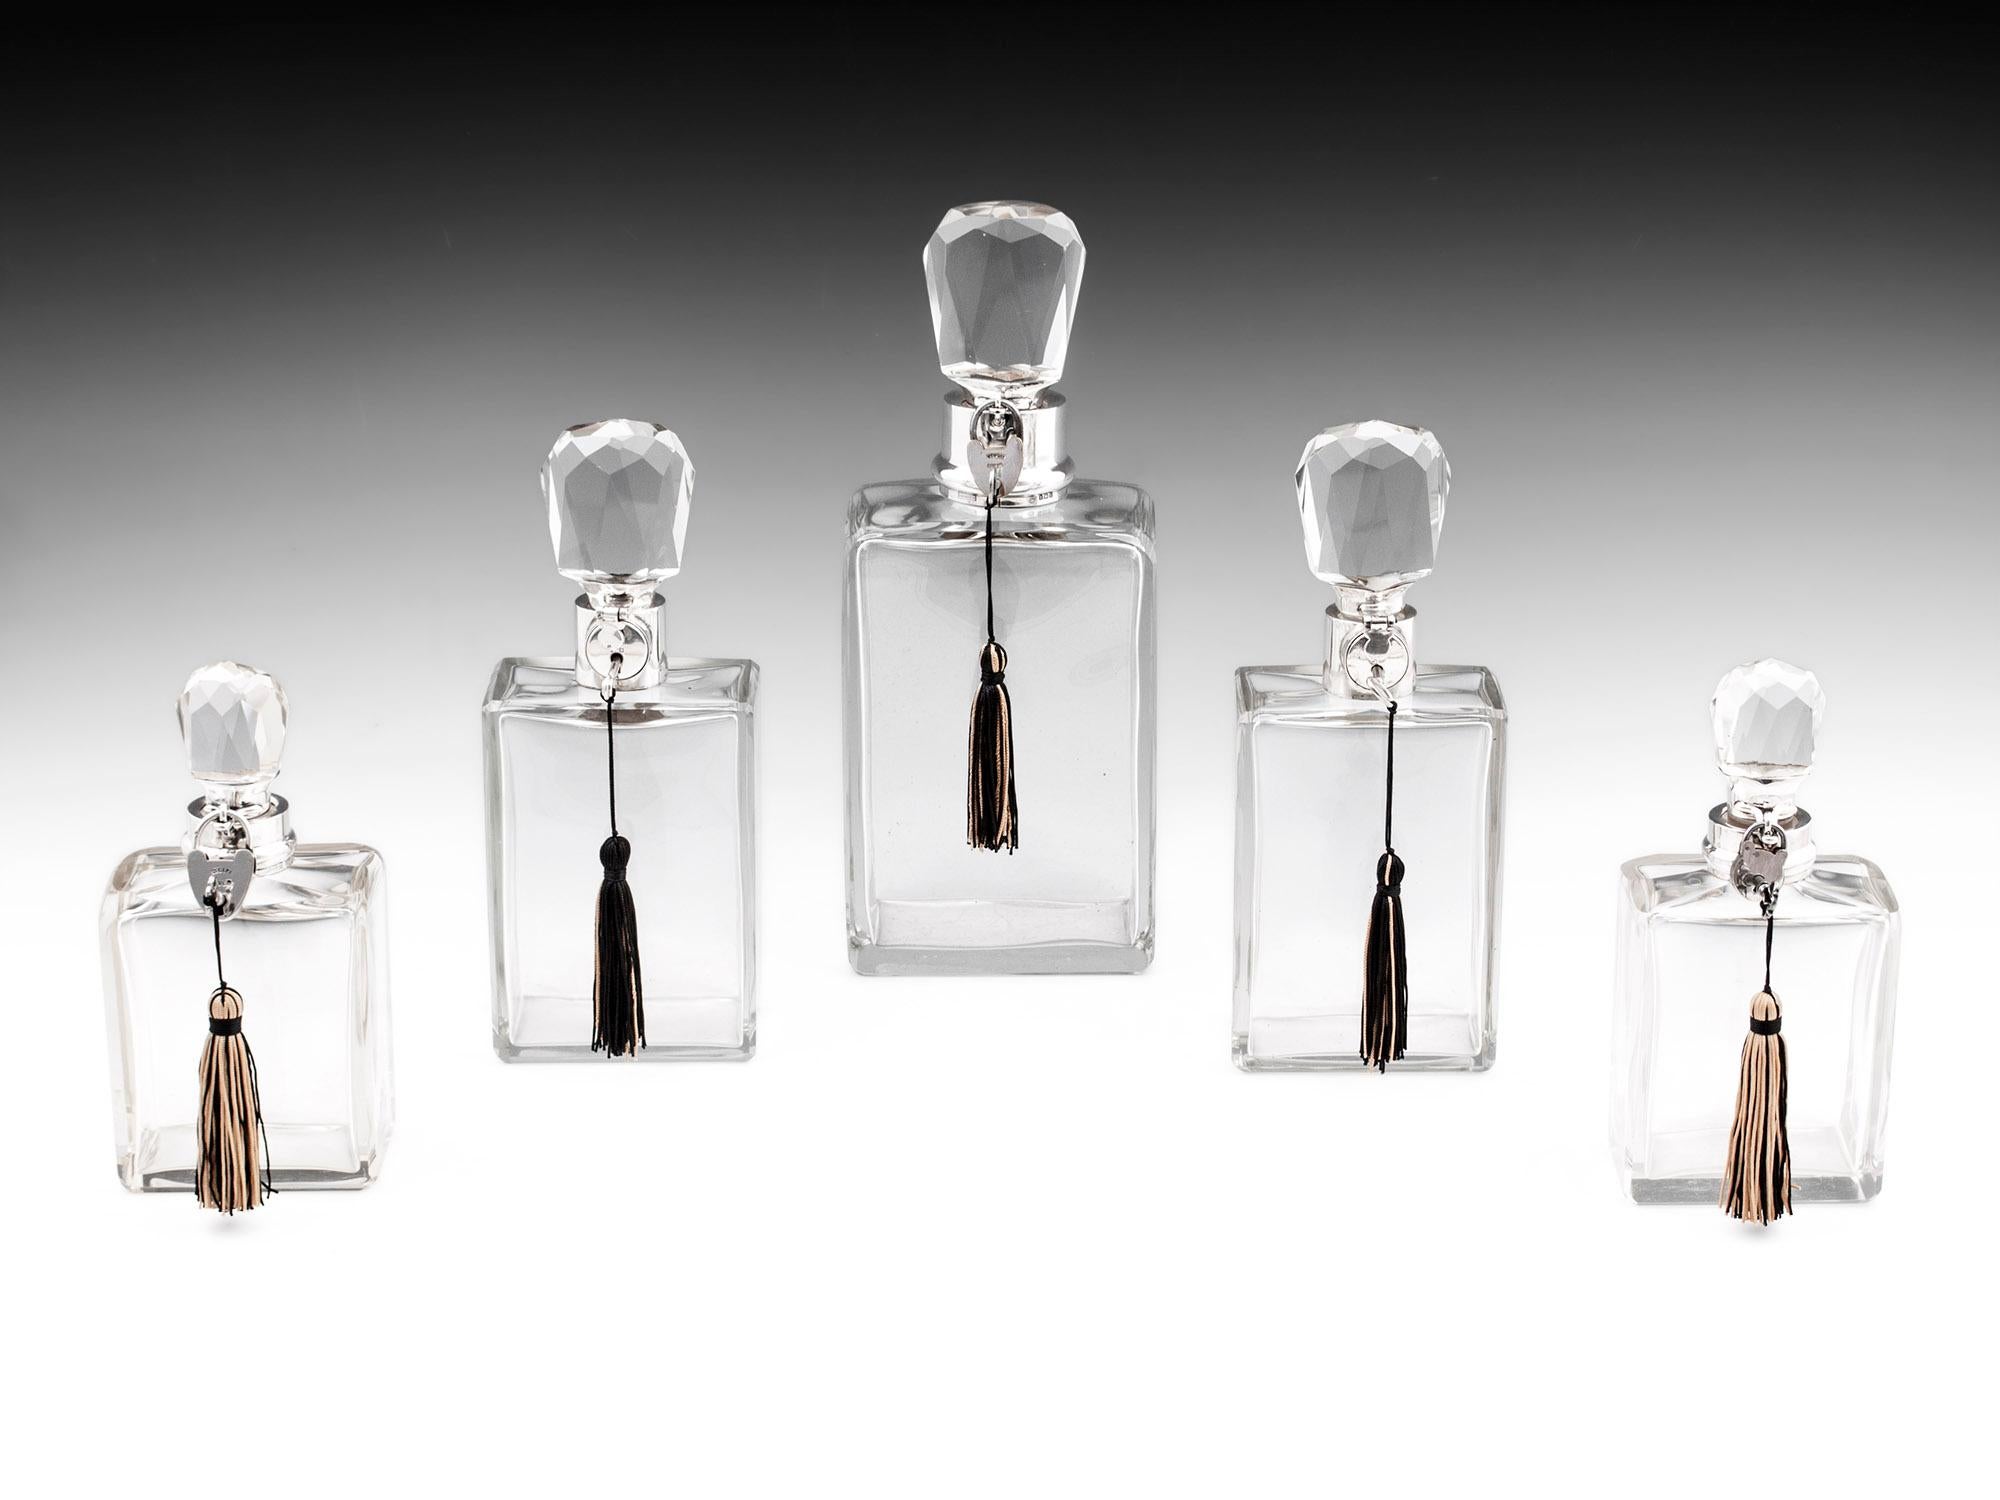 Extremely Rare Art Deco Decanter Set

We are pleased to present the ultimate statement piece for any high-end bar collection - a beautiful set of Hukin and Heath Art Deco Decanters. Intricately crafted with the finest materials, this set is a